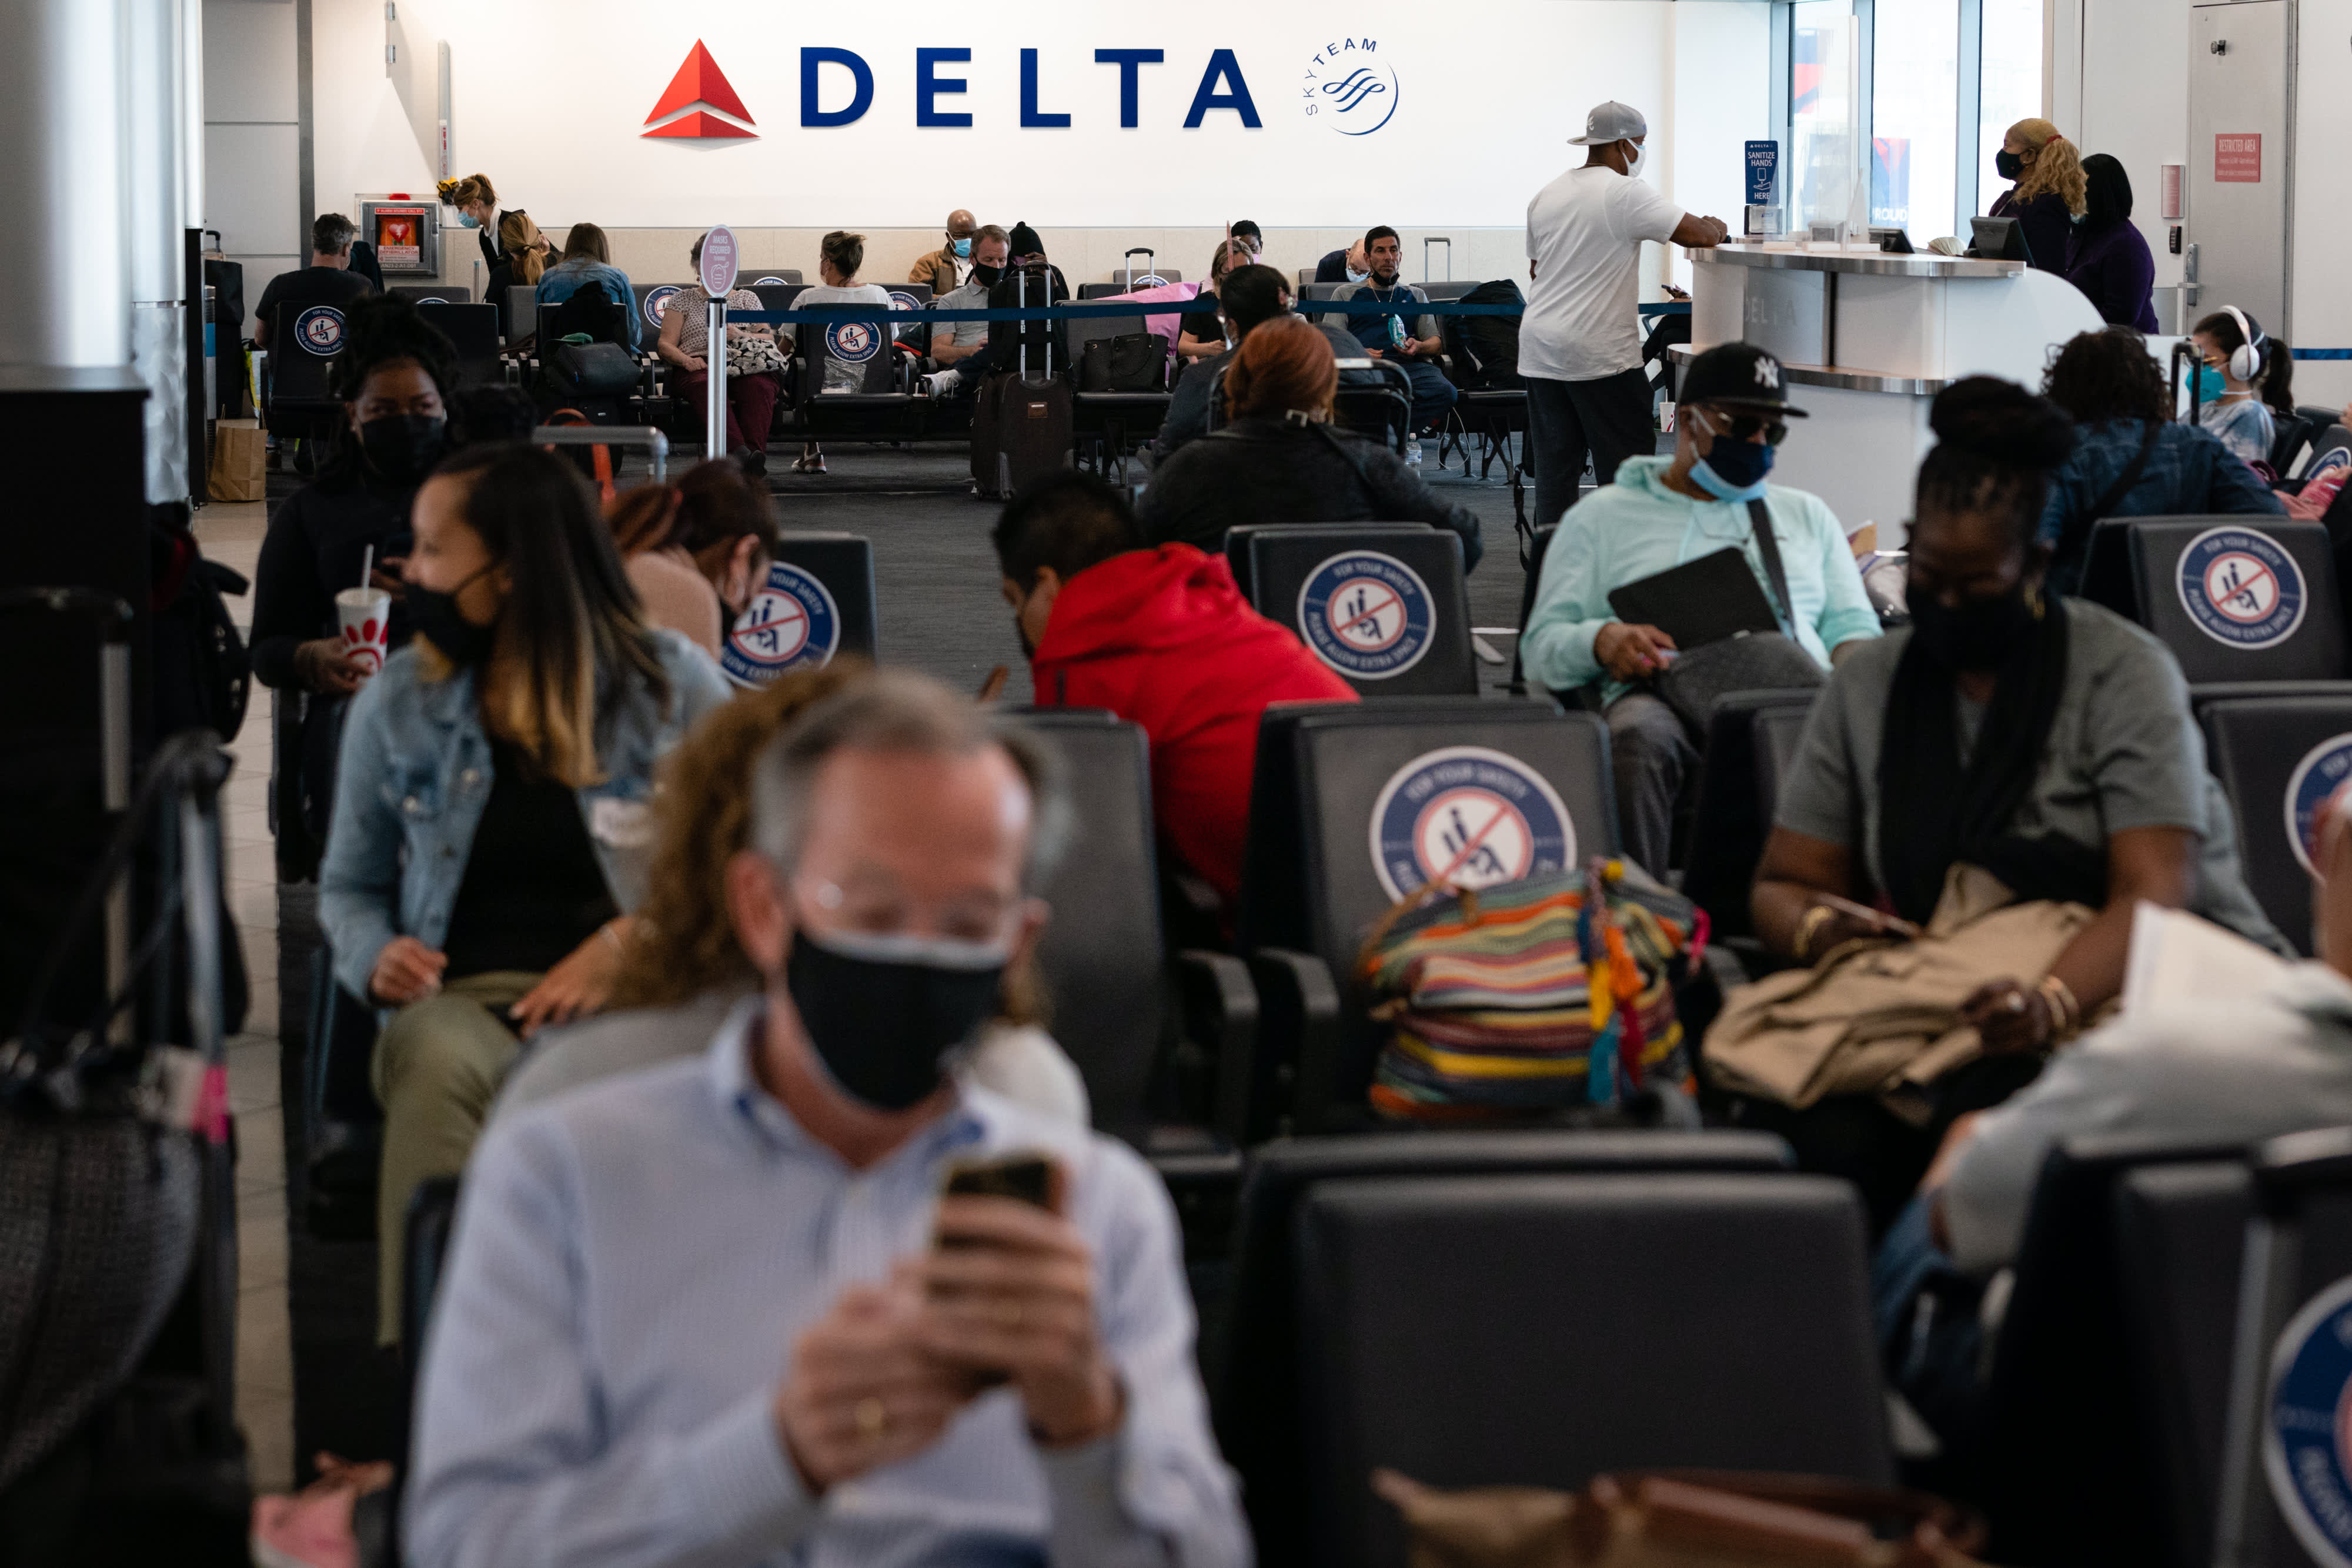 Delta wants other airlines to share 'no-fly' lists of unruly passengers